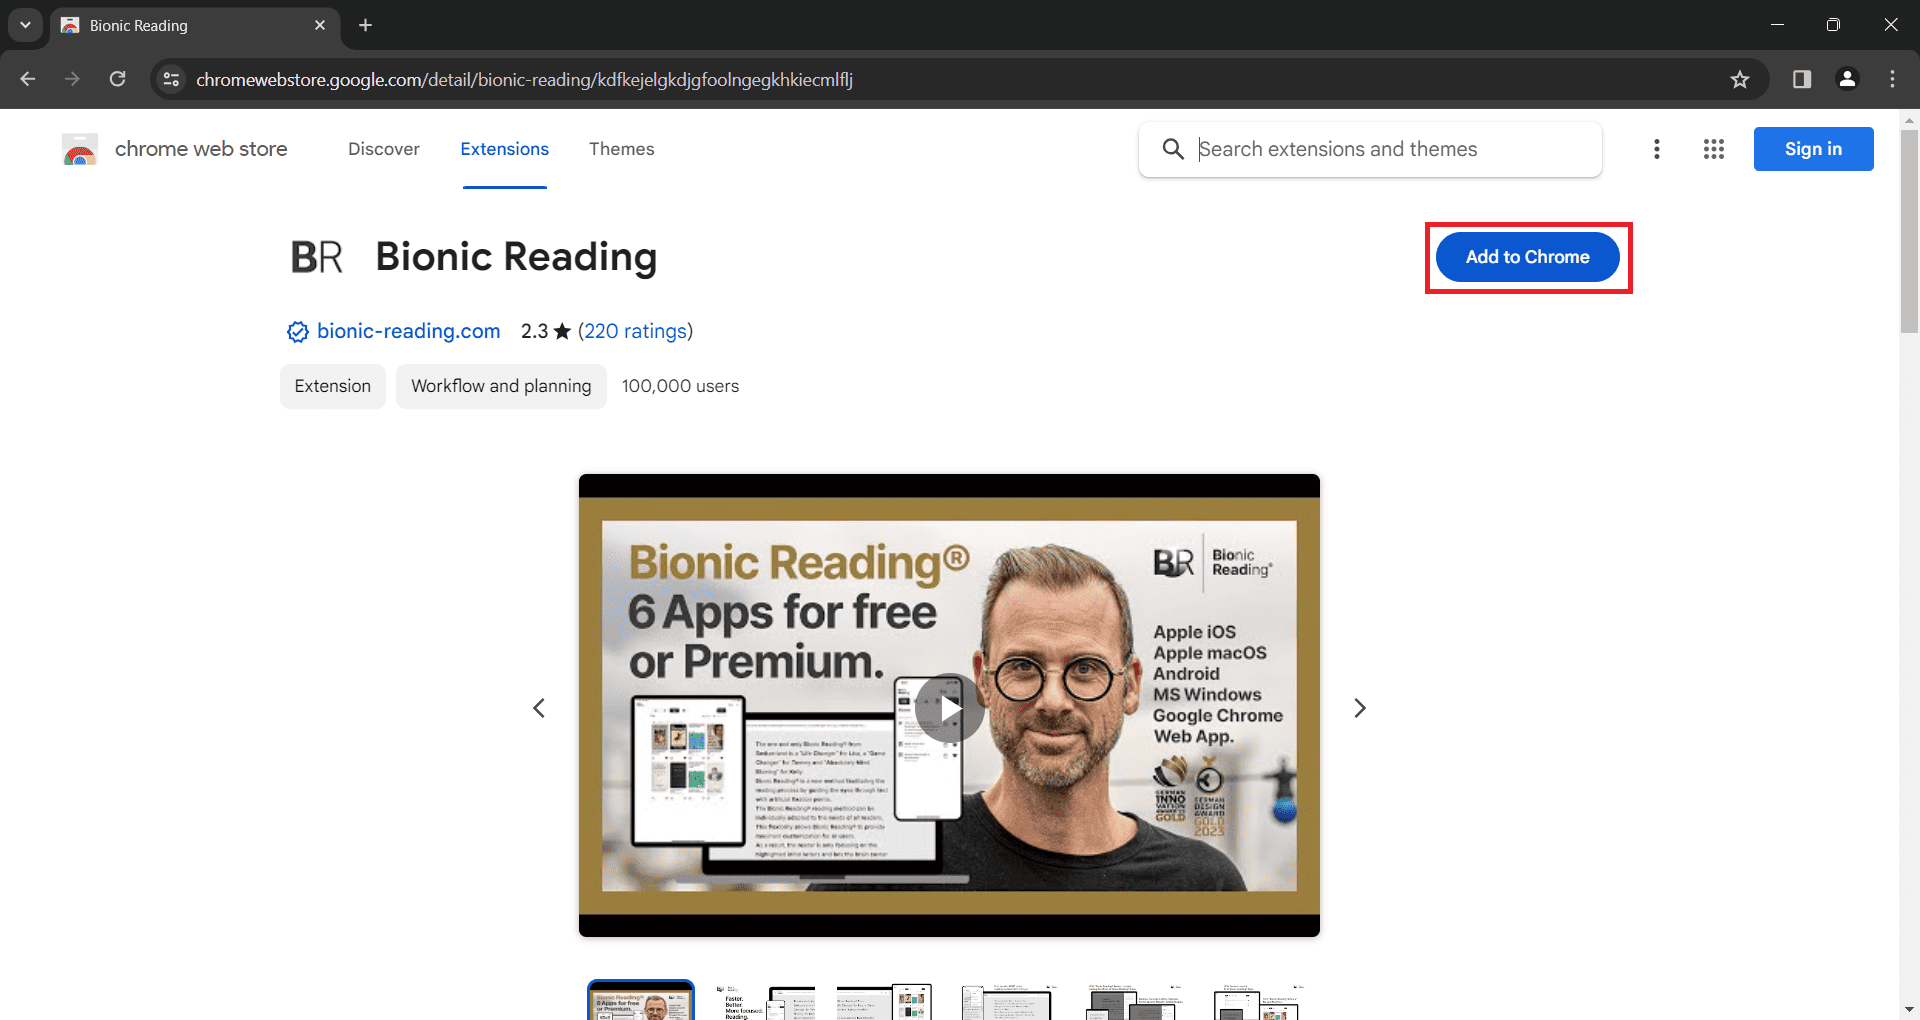 How to Use Bionic Reading on Chrome or Edge?